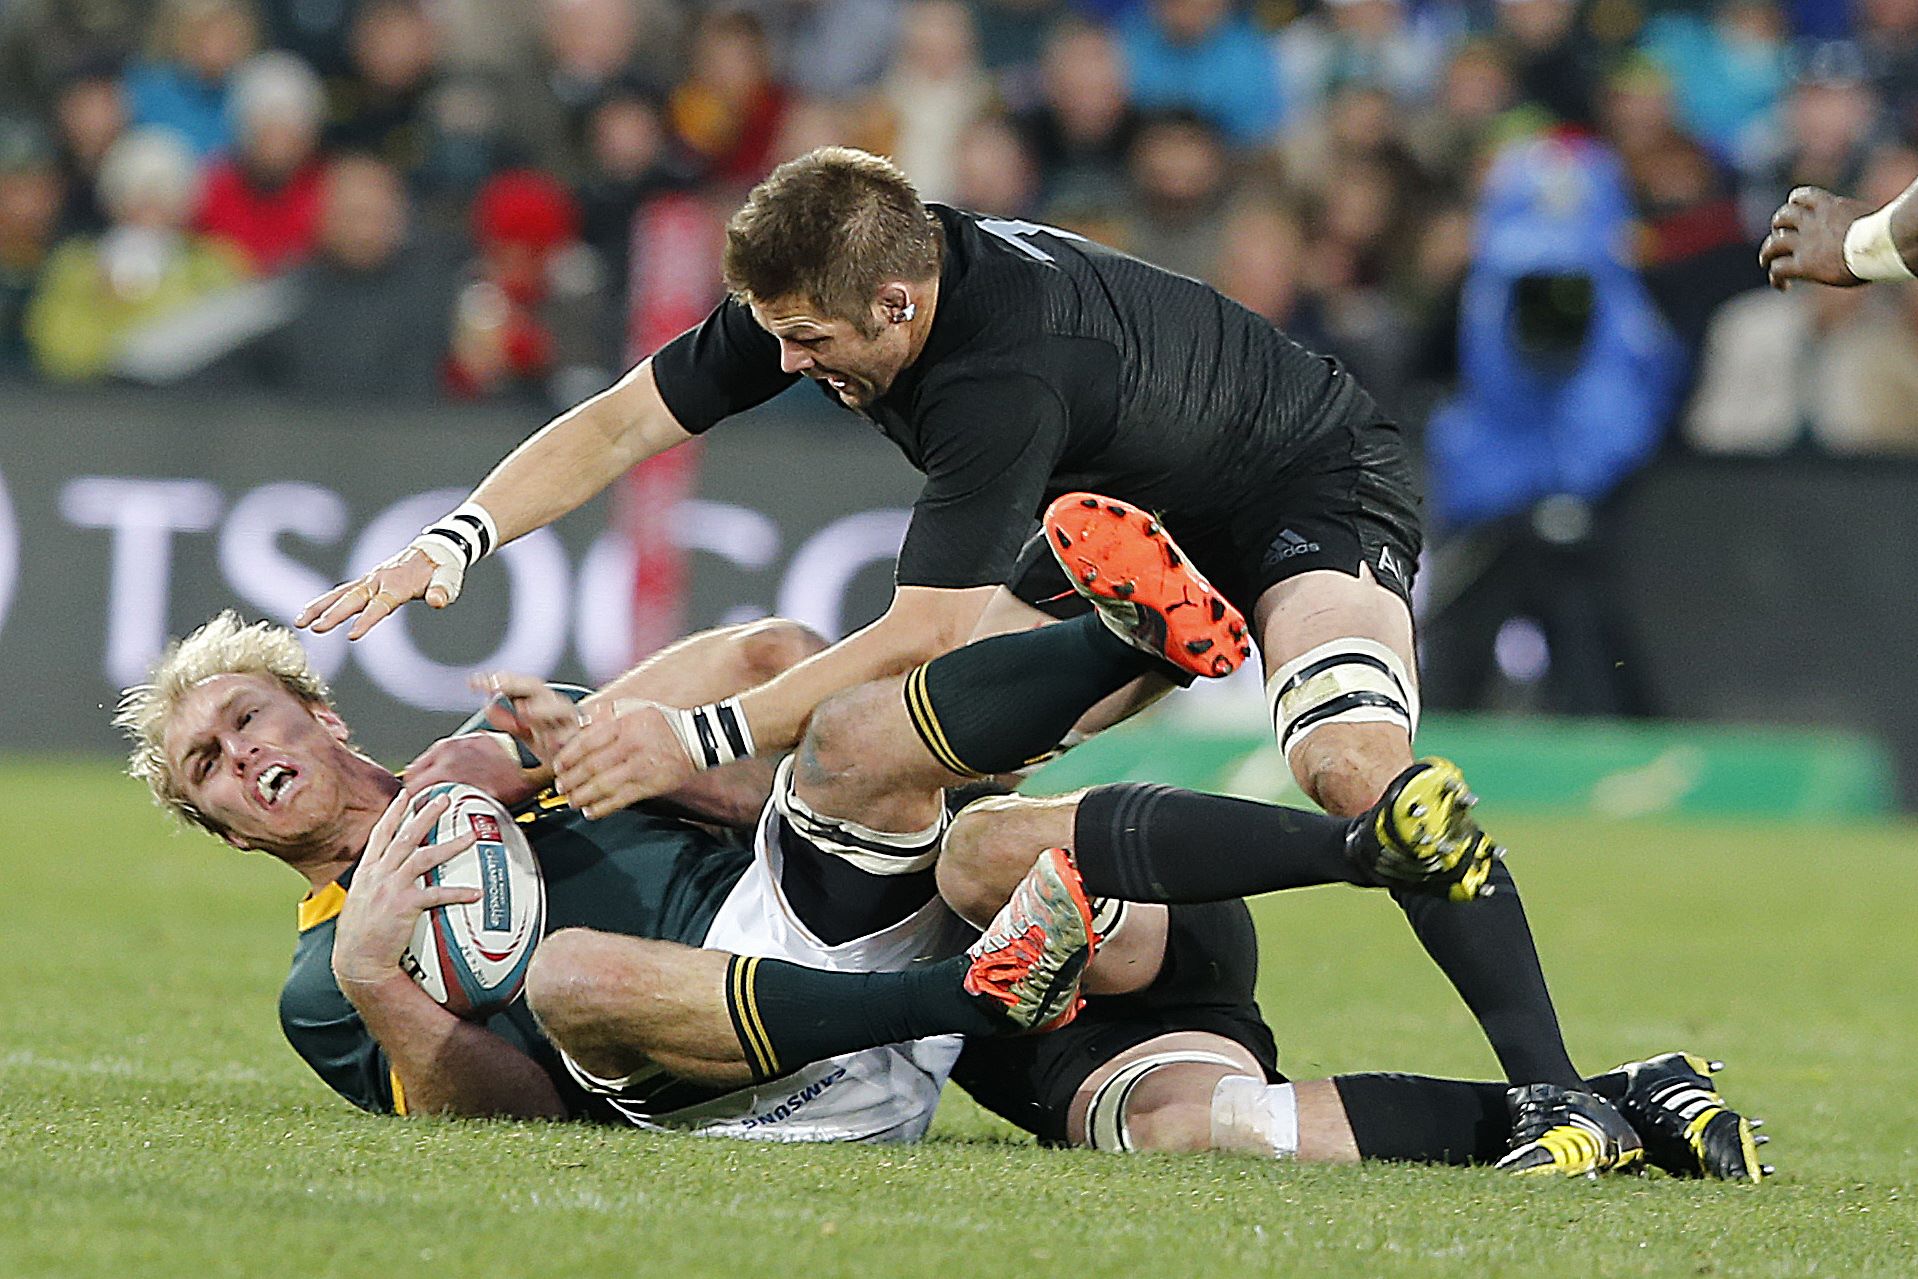 Captains Schalk Burger of the Springboks and Richie McCaw of the All Blacks tangle in their Rugby Championship clash in Johannesburg. New Zealand won 27-20. Photo: AFP